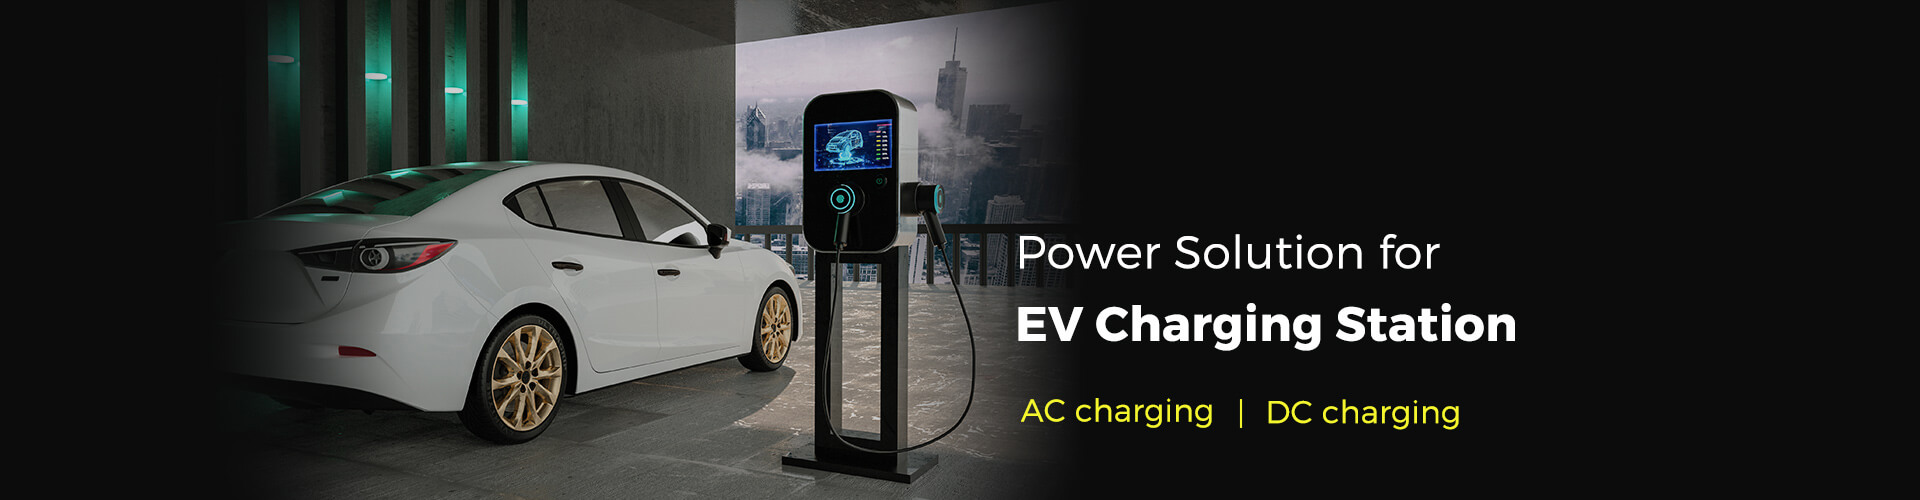 Power Solution for EV Charging Station -- DC charging | AC charging